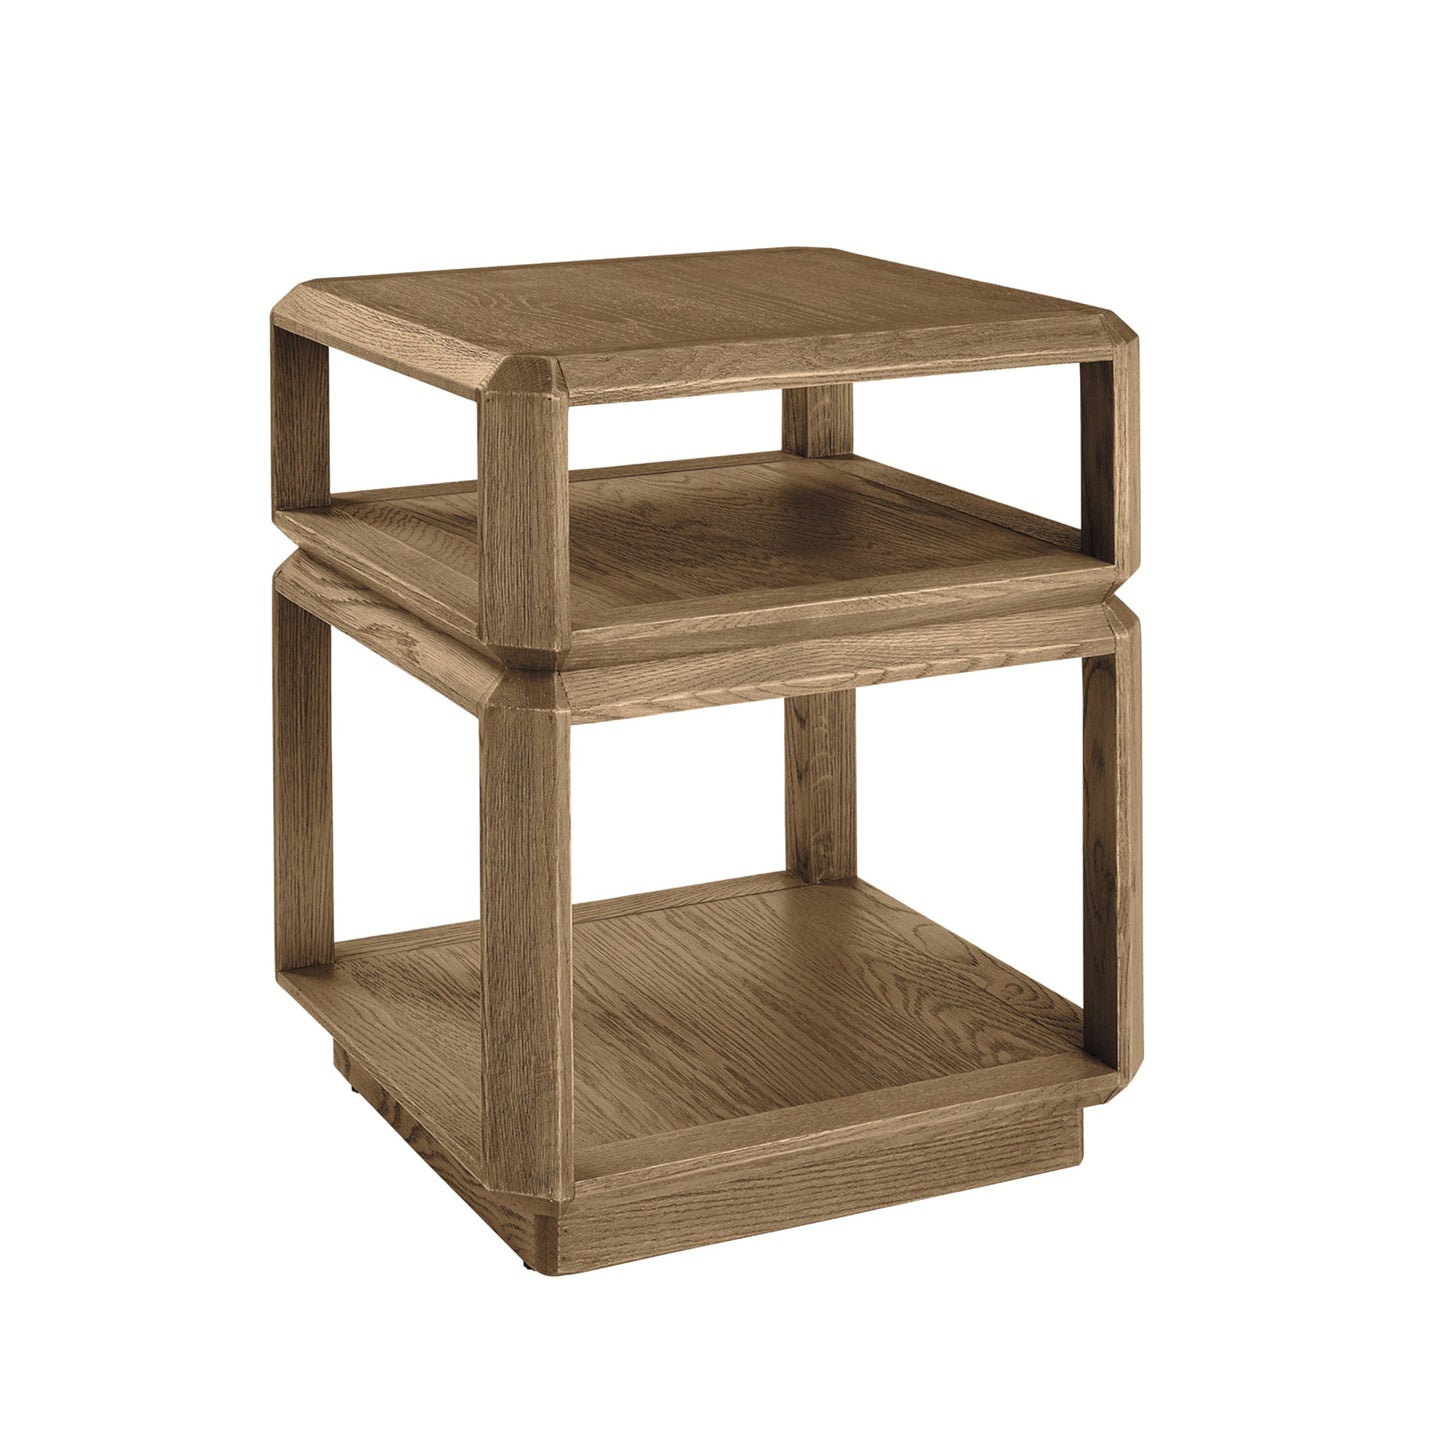 Mateo side table